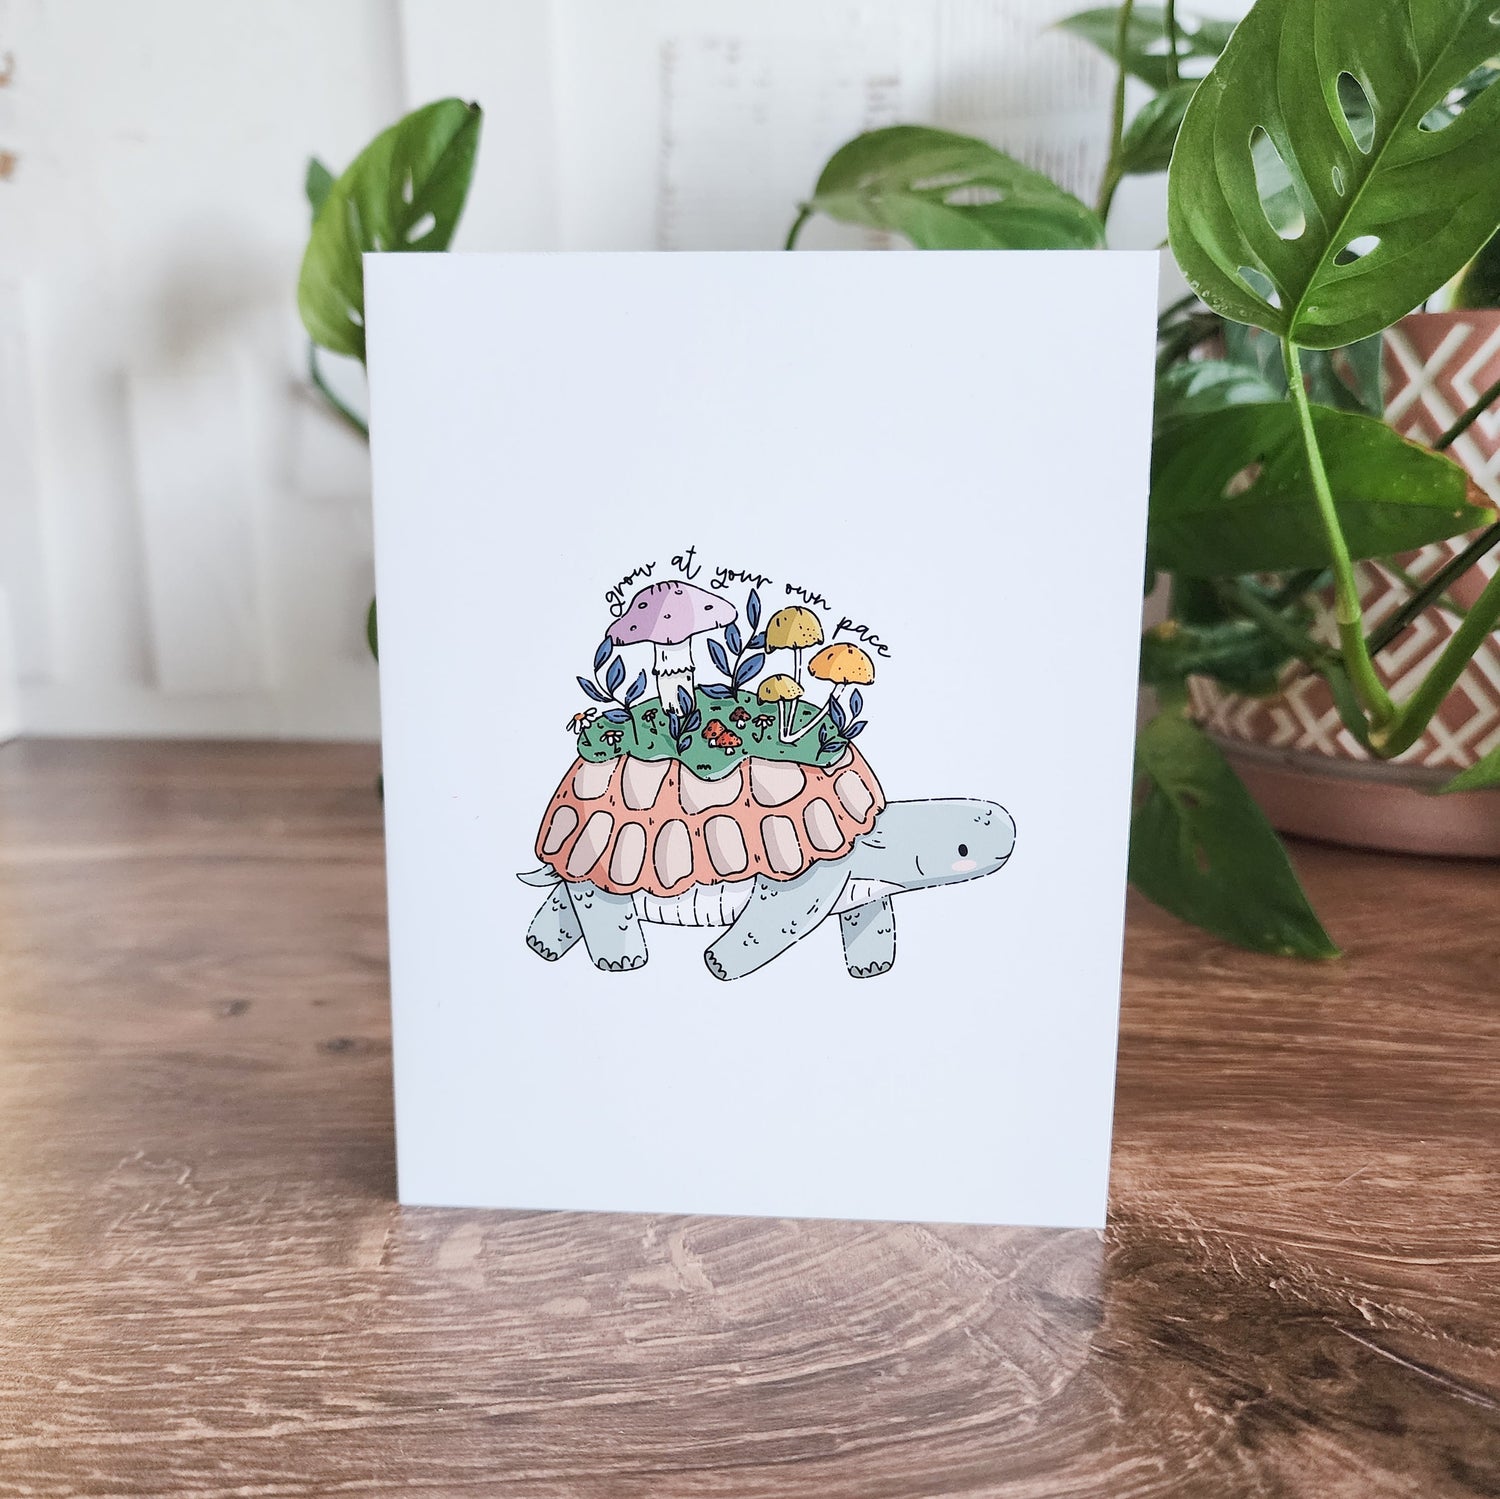 turtle greeting card in front of a houseplant